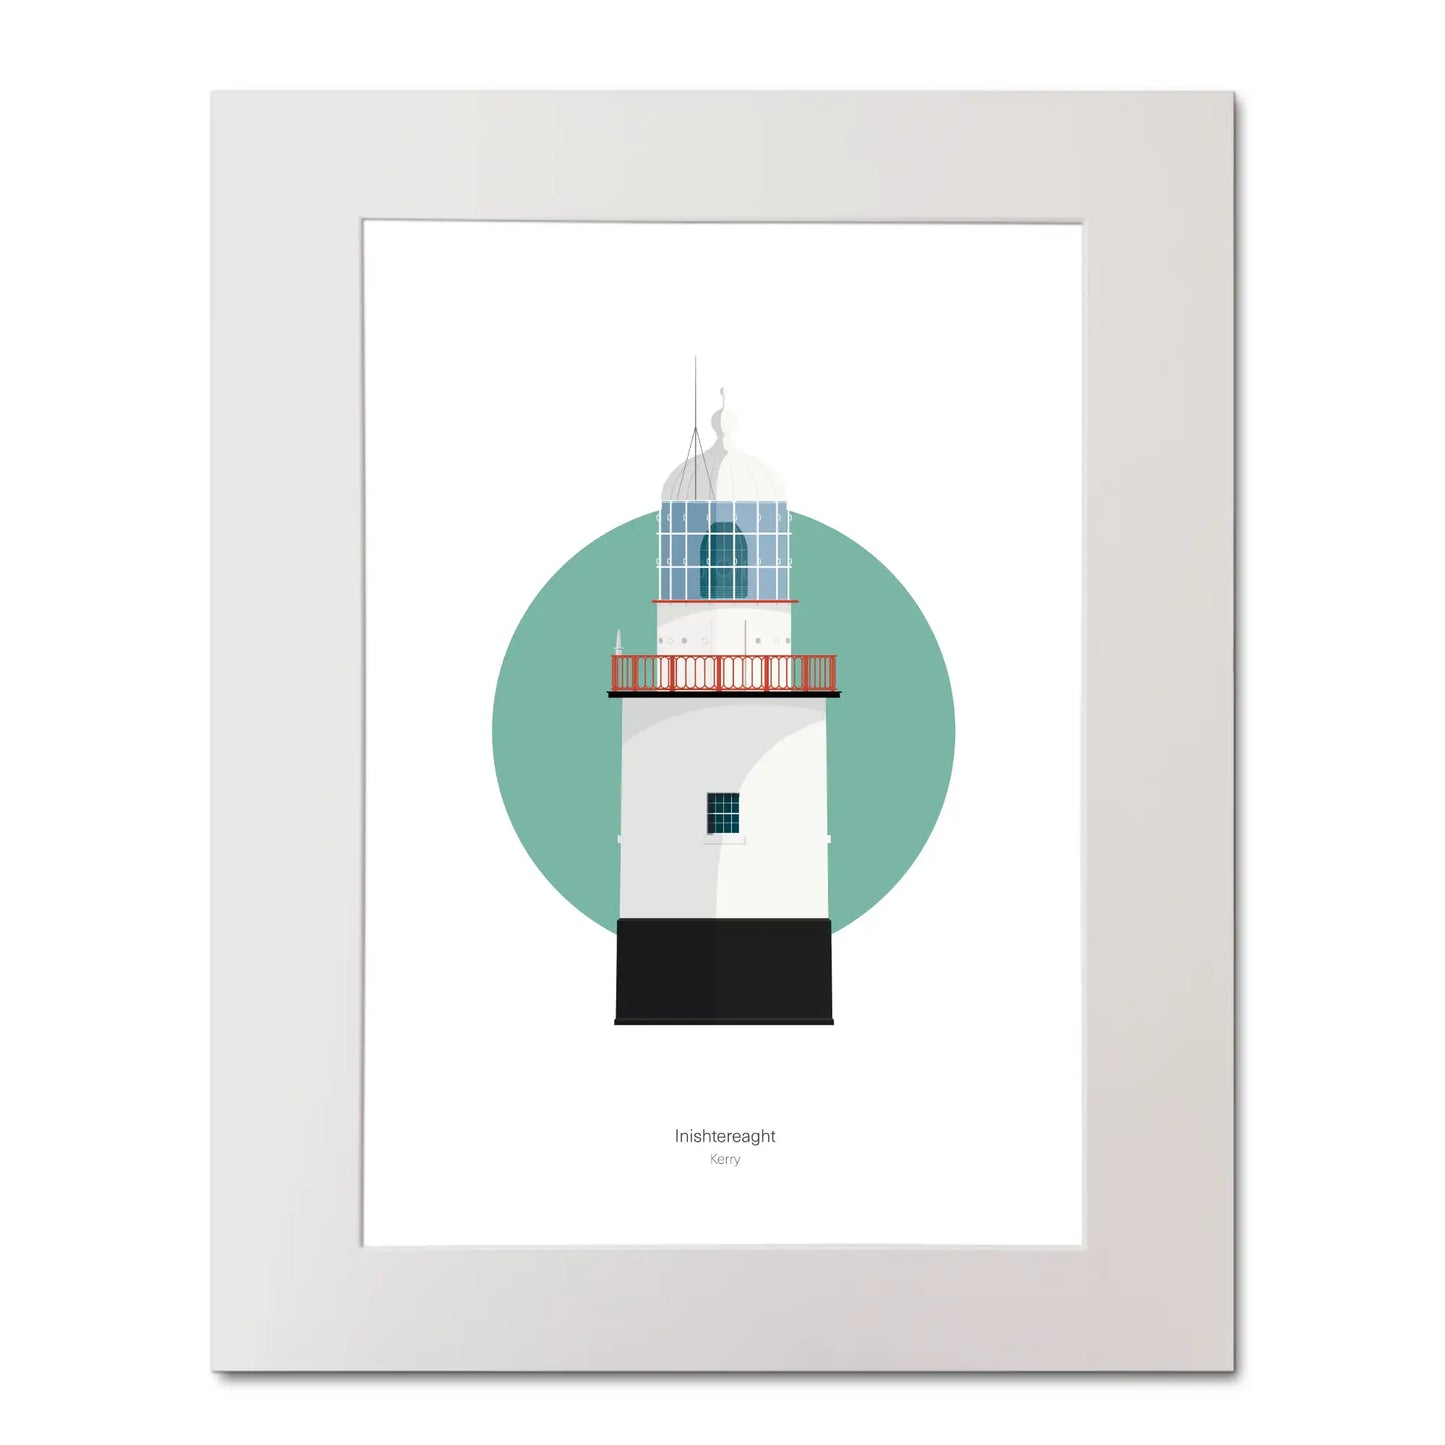 Illustration of Inistearaght lighthouse on a white background inside light blue square,  in a white frame measuring 40x50cm.